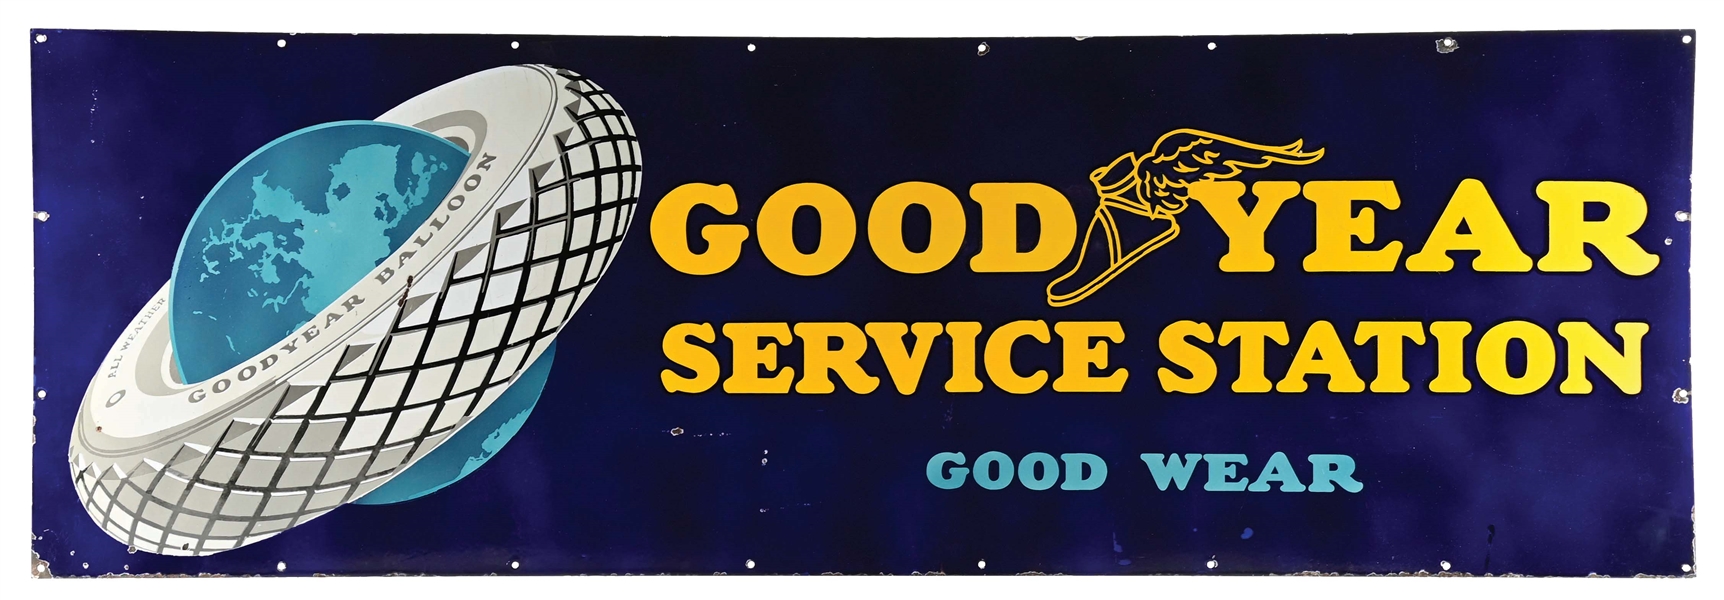 GOODYEAR SERVICE STATION PORCELAIN SIGN W/GLOBE GRAPHIC. 